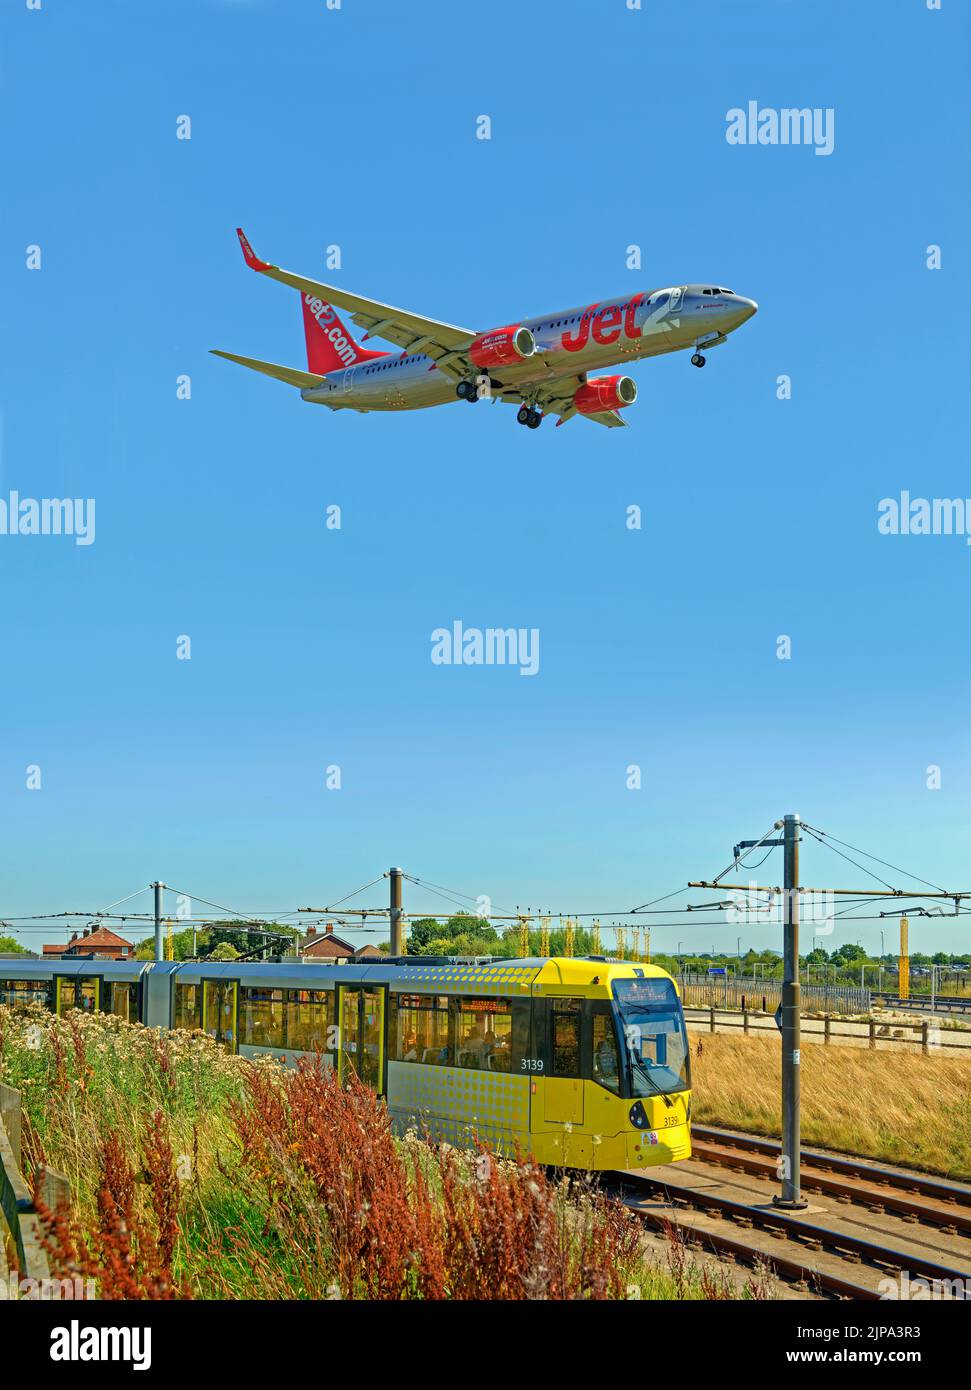 Manchester Metrolink tram approaching the Manchester Airport station, Manchester, England. Stock Photo